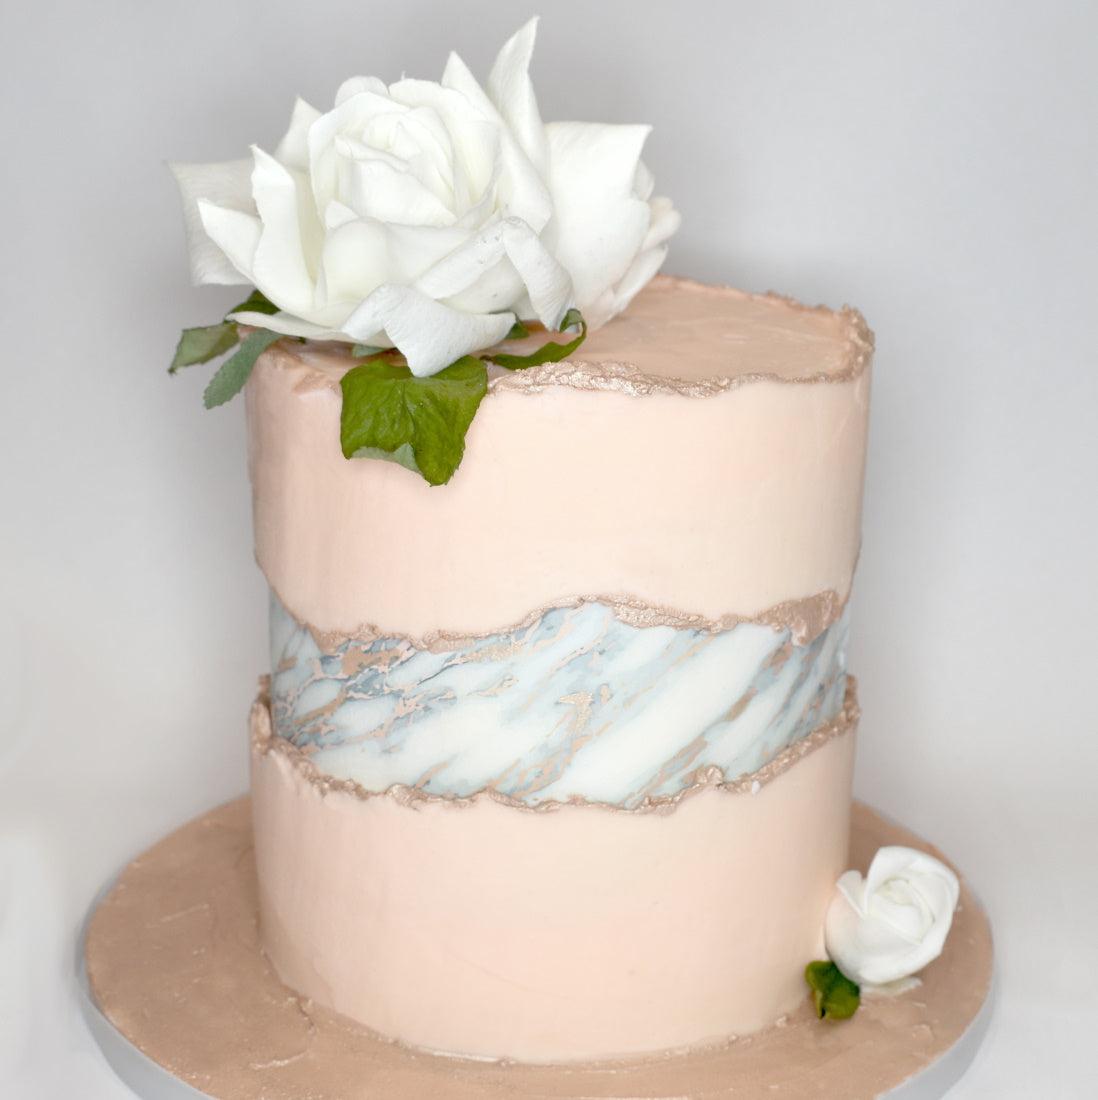 A3 printed icing cake wrap suitable for fault line cakes or full wraps.